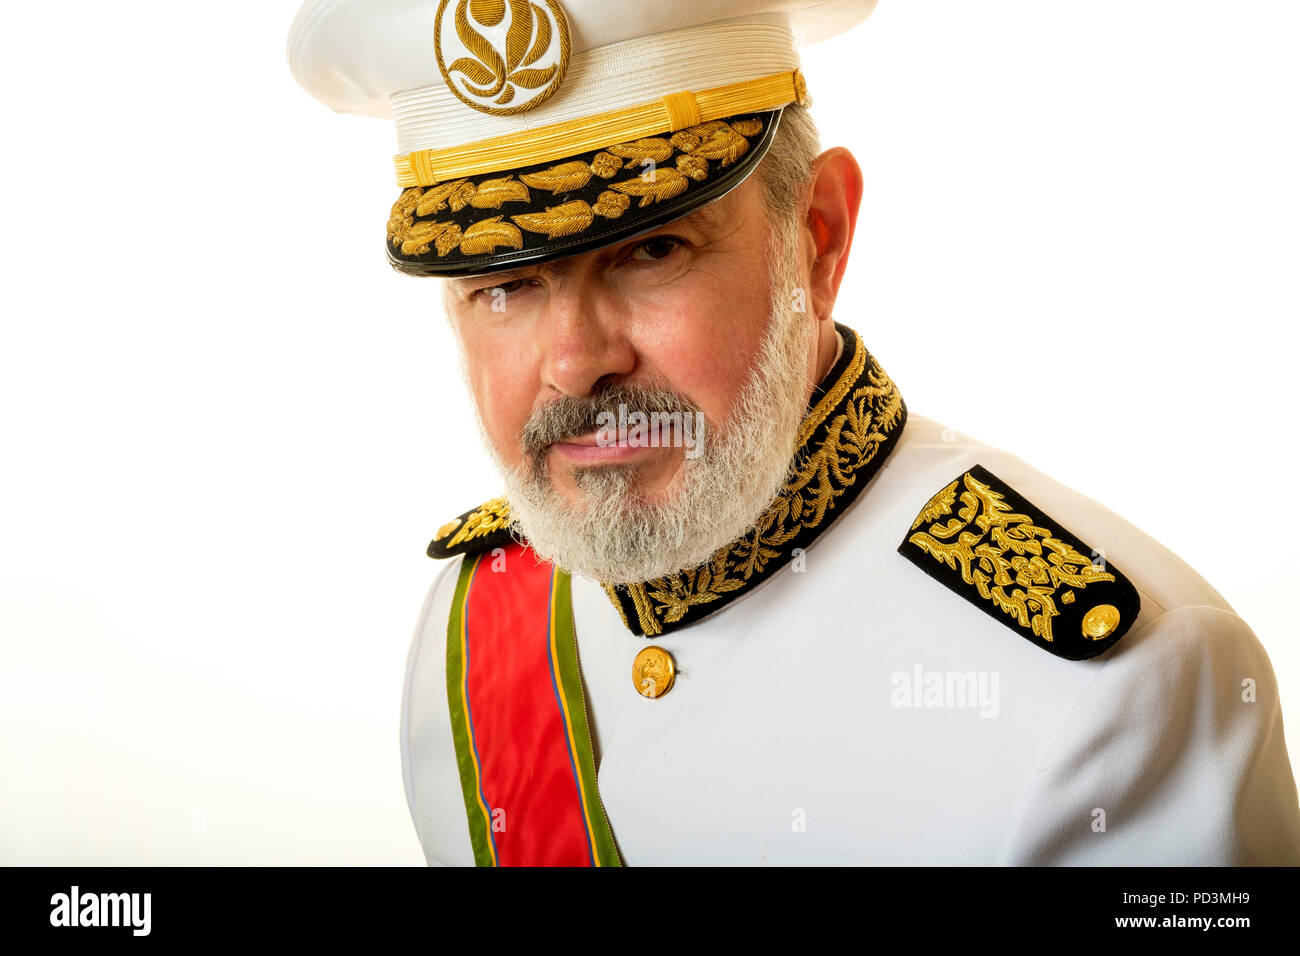 Fictional character : Governor Babala with white full uniform, red honorific sash and officer's cap, Stock Photo